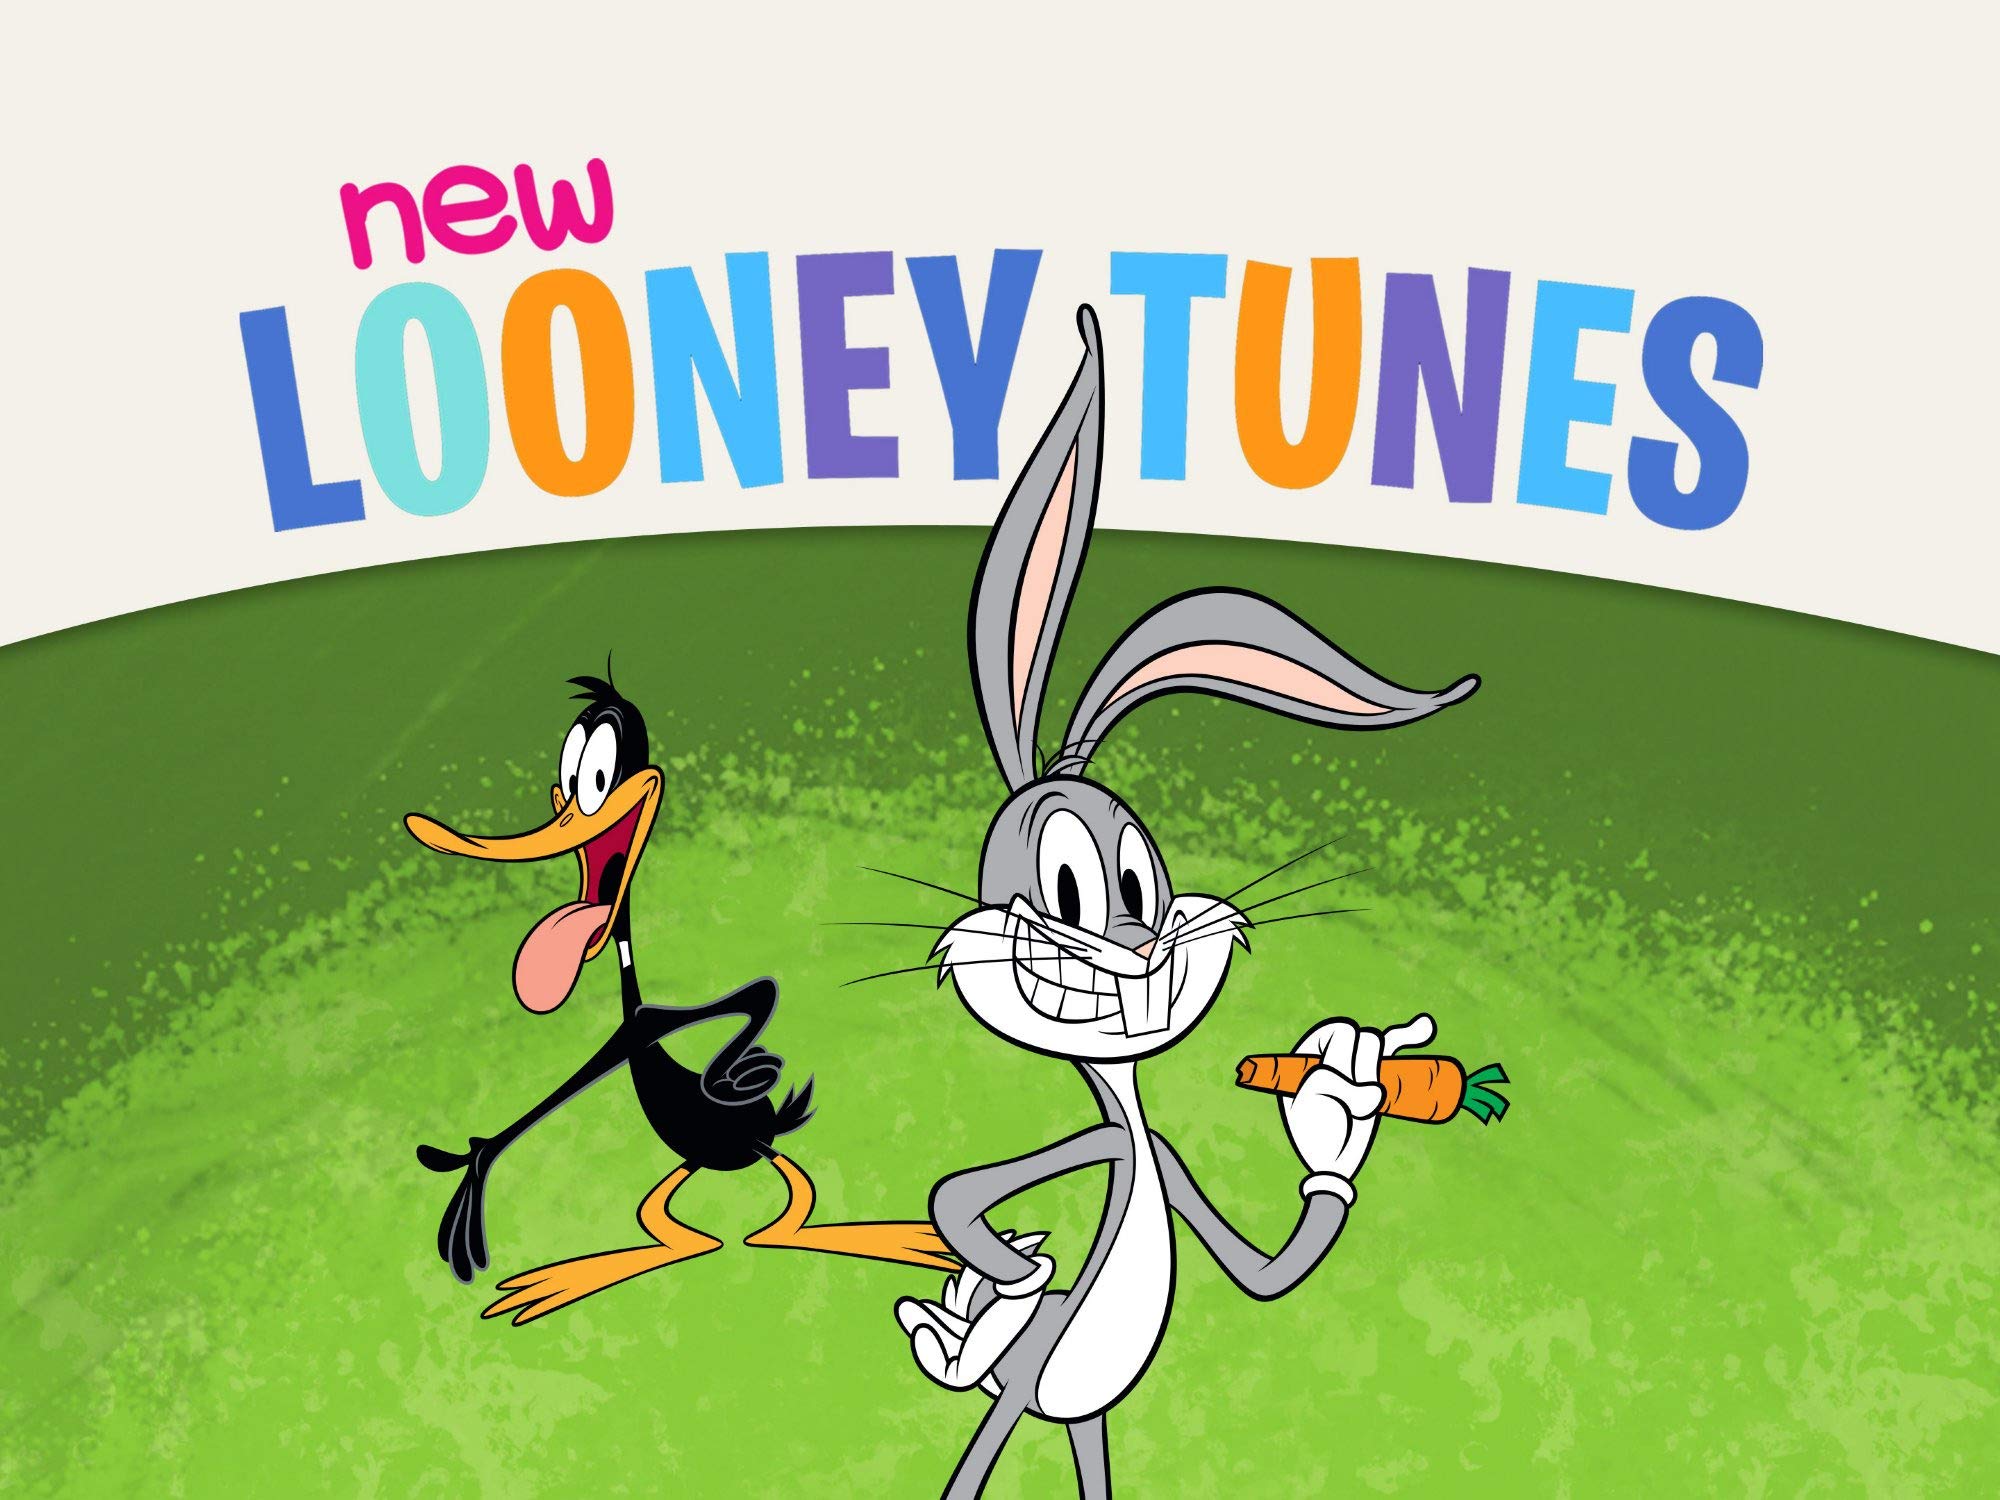 Looney Tunes Wallpaper - KoLPaPer - Awesome Free HD Wallpapers